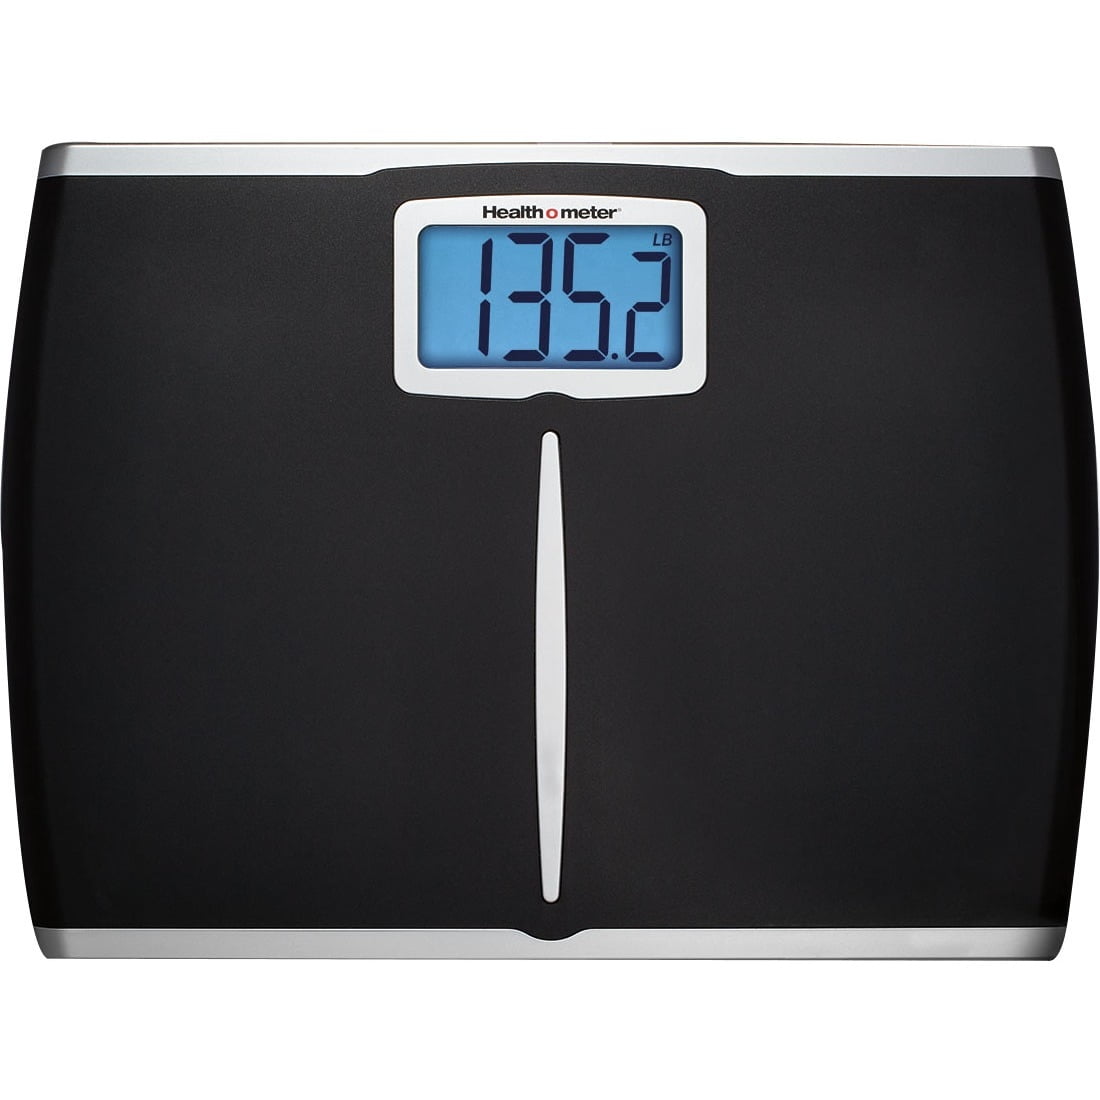 HealthOMeter-844KL $78.00-Free Shipping Digital Bathroom Weight Scales-Wholesale  Point